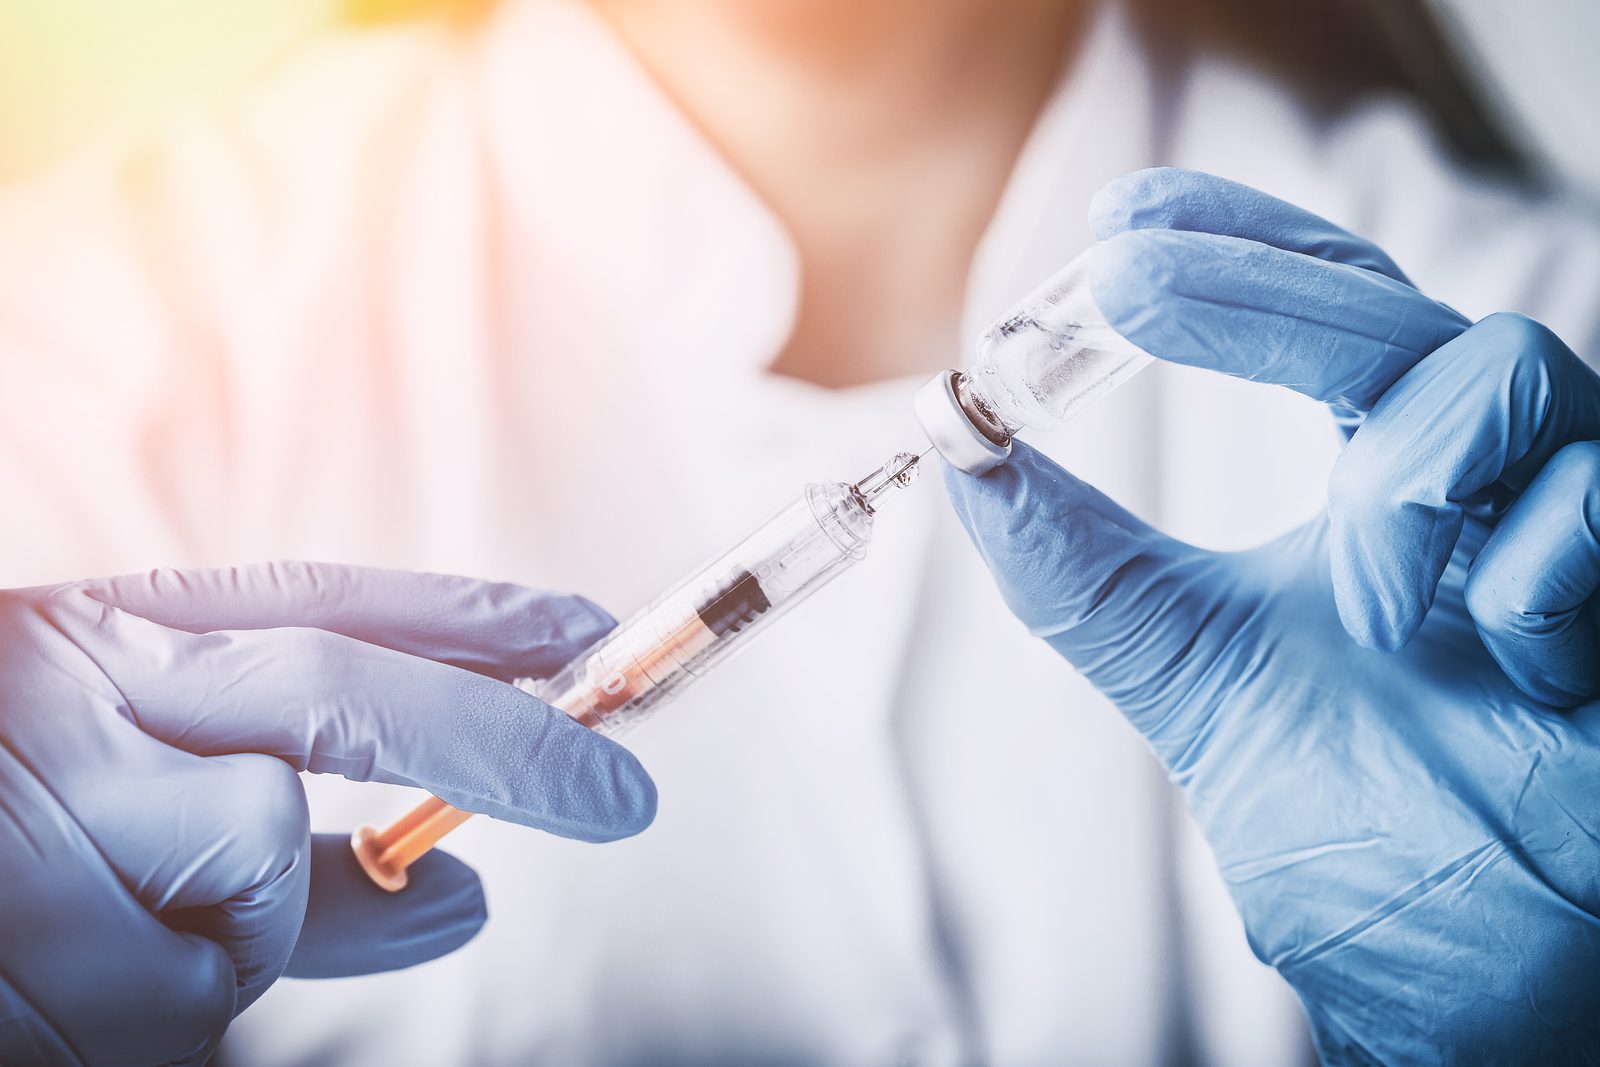 What Businesses Need to Know About the New Employer Vaccine Mandate